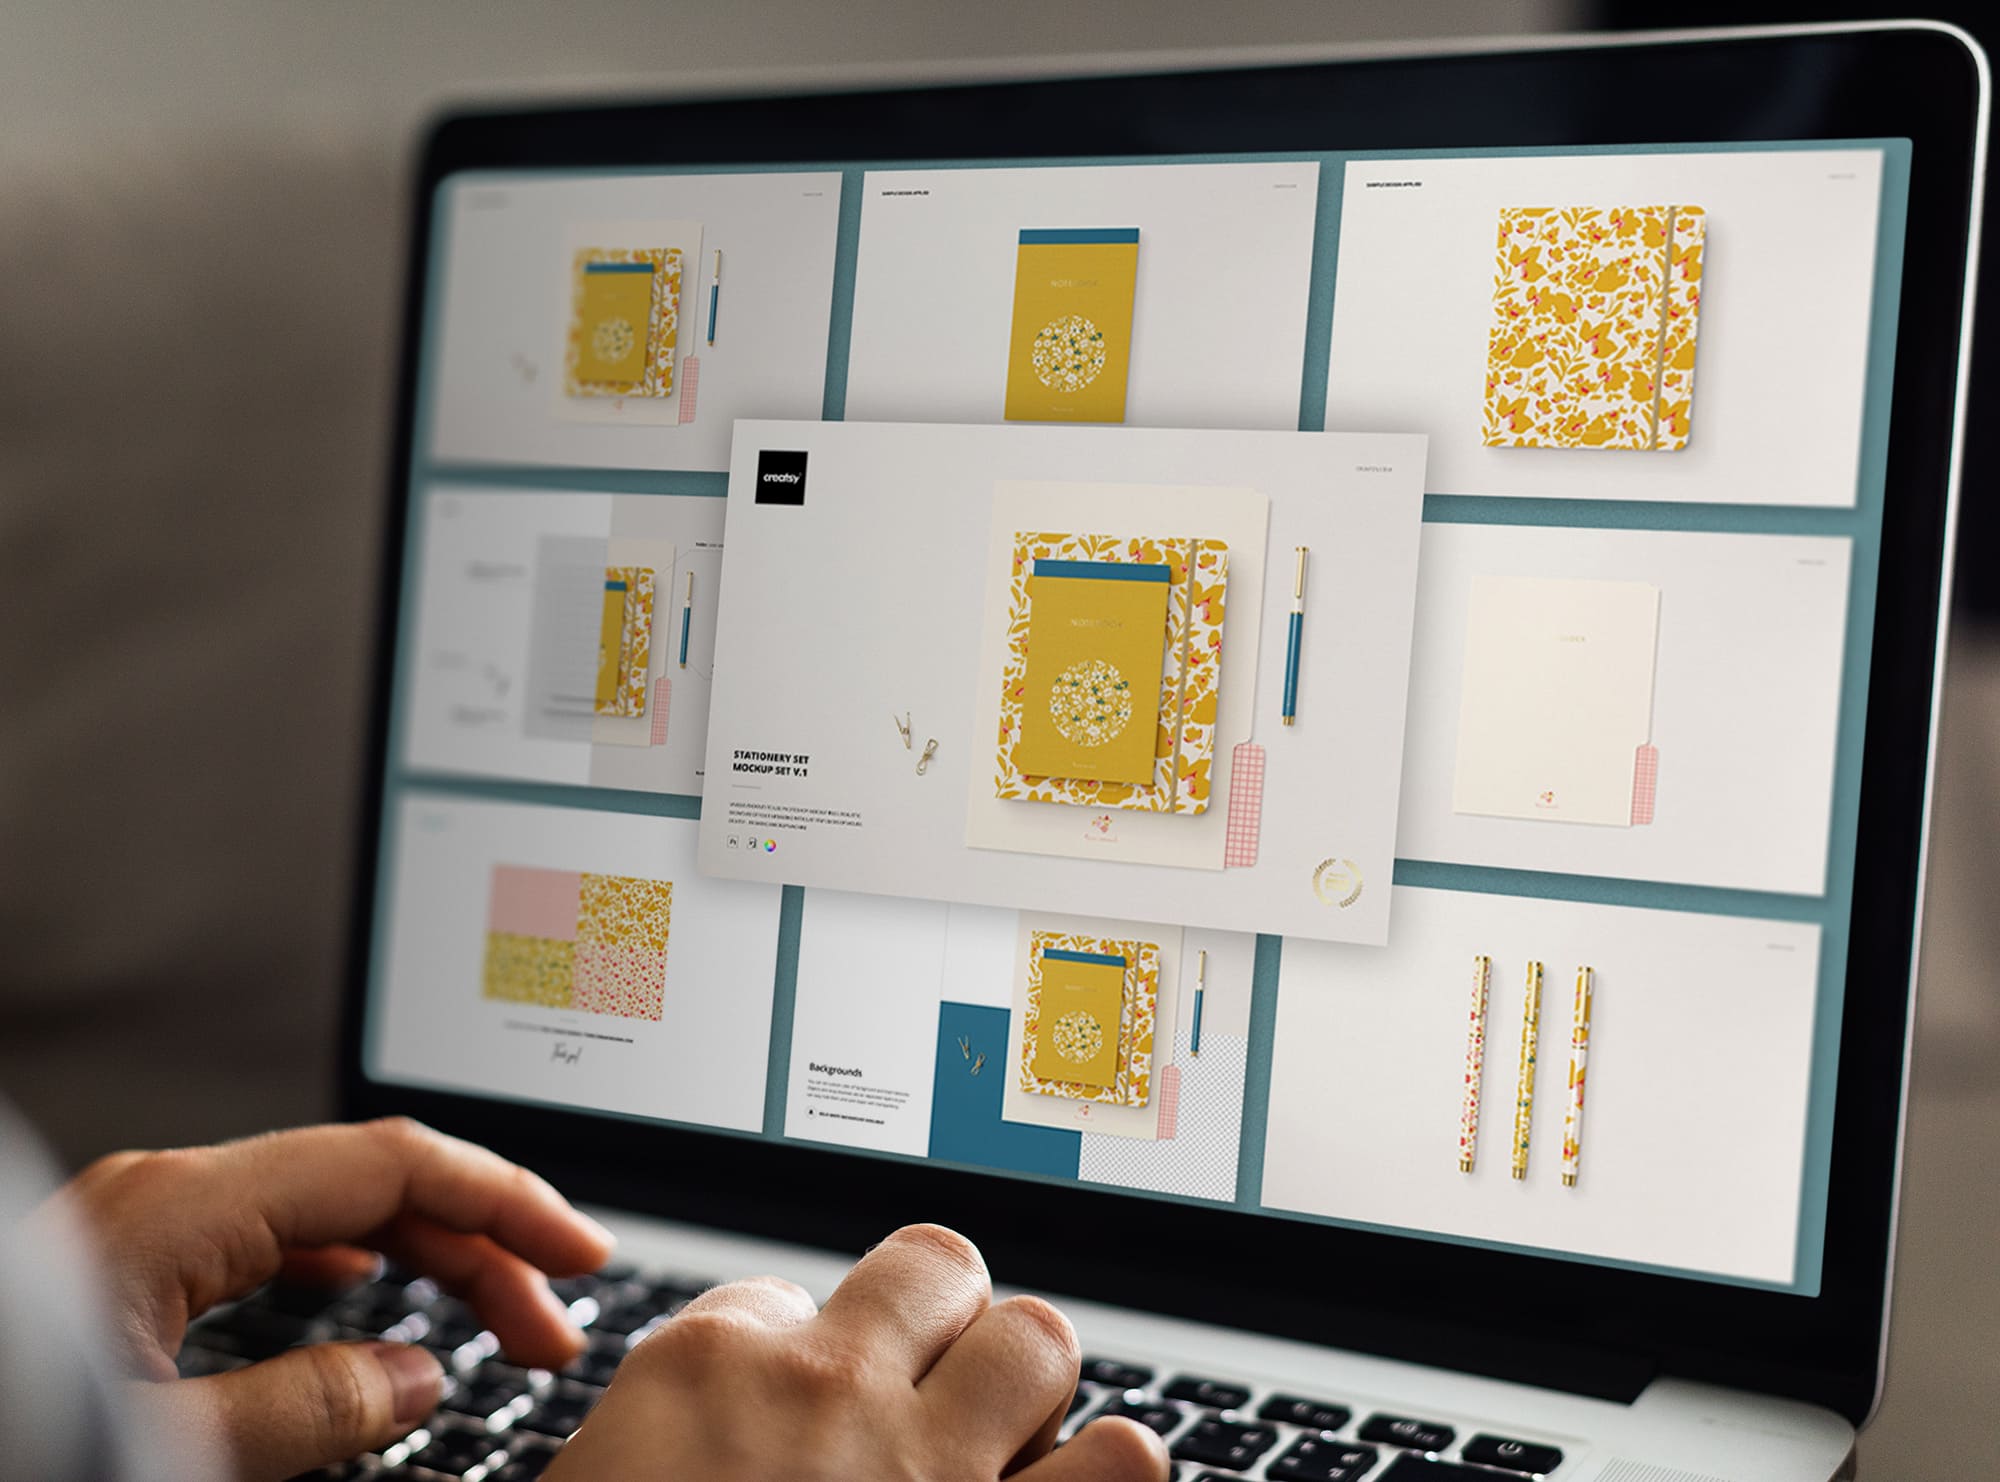 Laptop on screen with images of colorful stationery mockups.